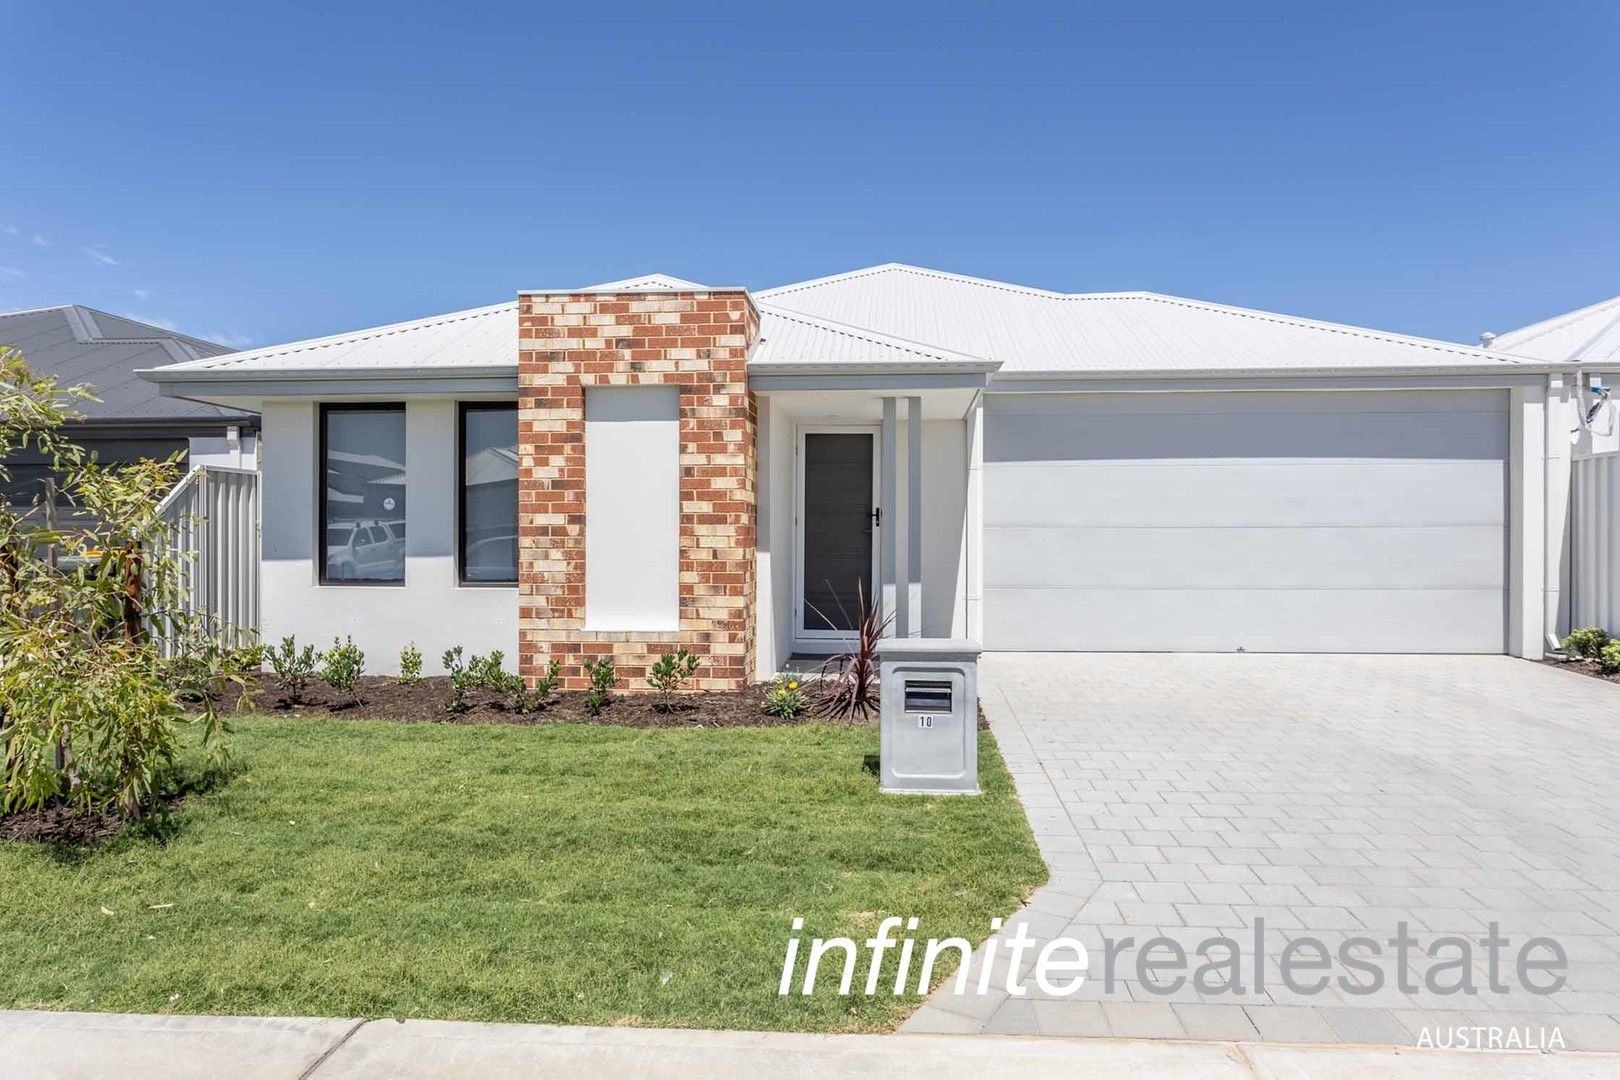 3 bedrooms House in 10 Tailspin Road BRABHAM WA, 6055